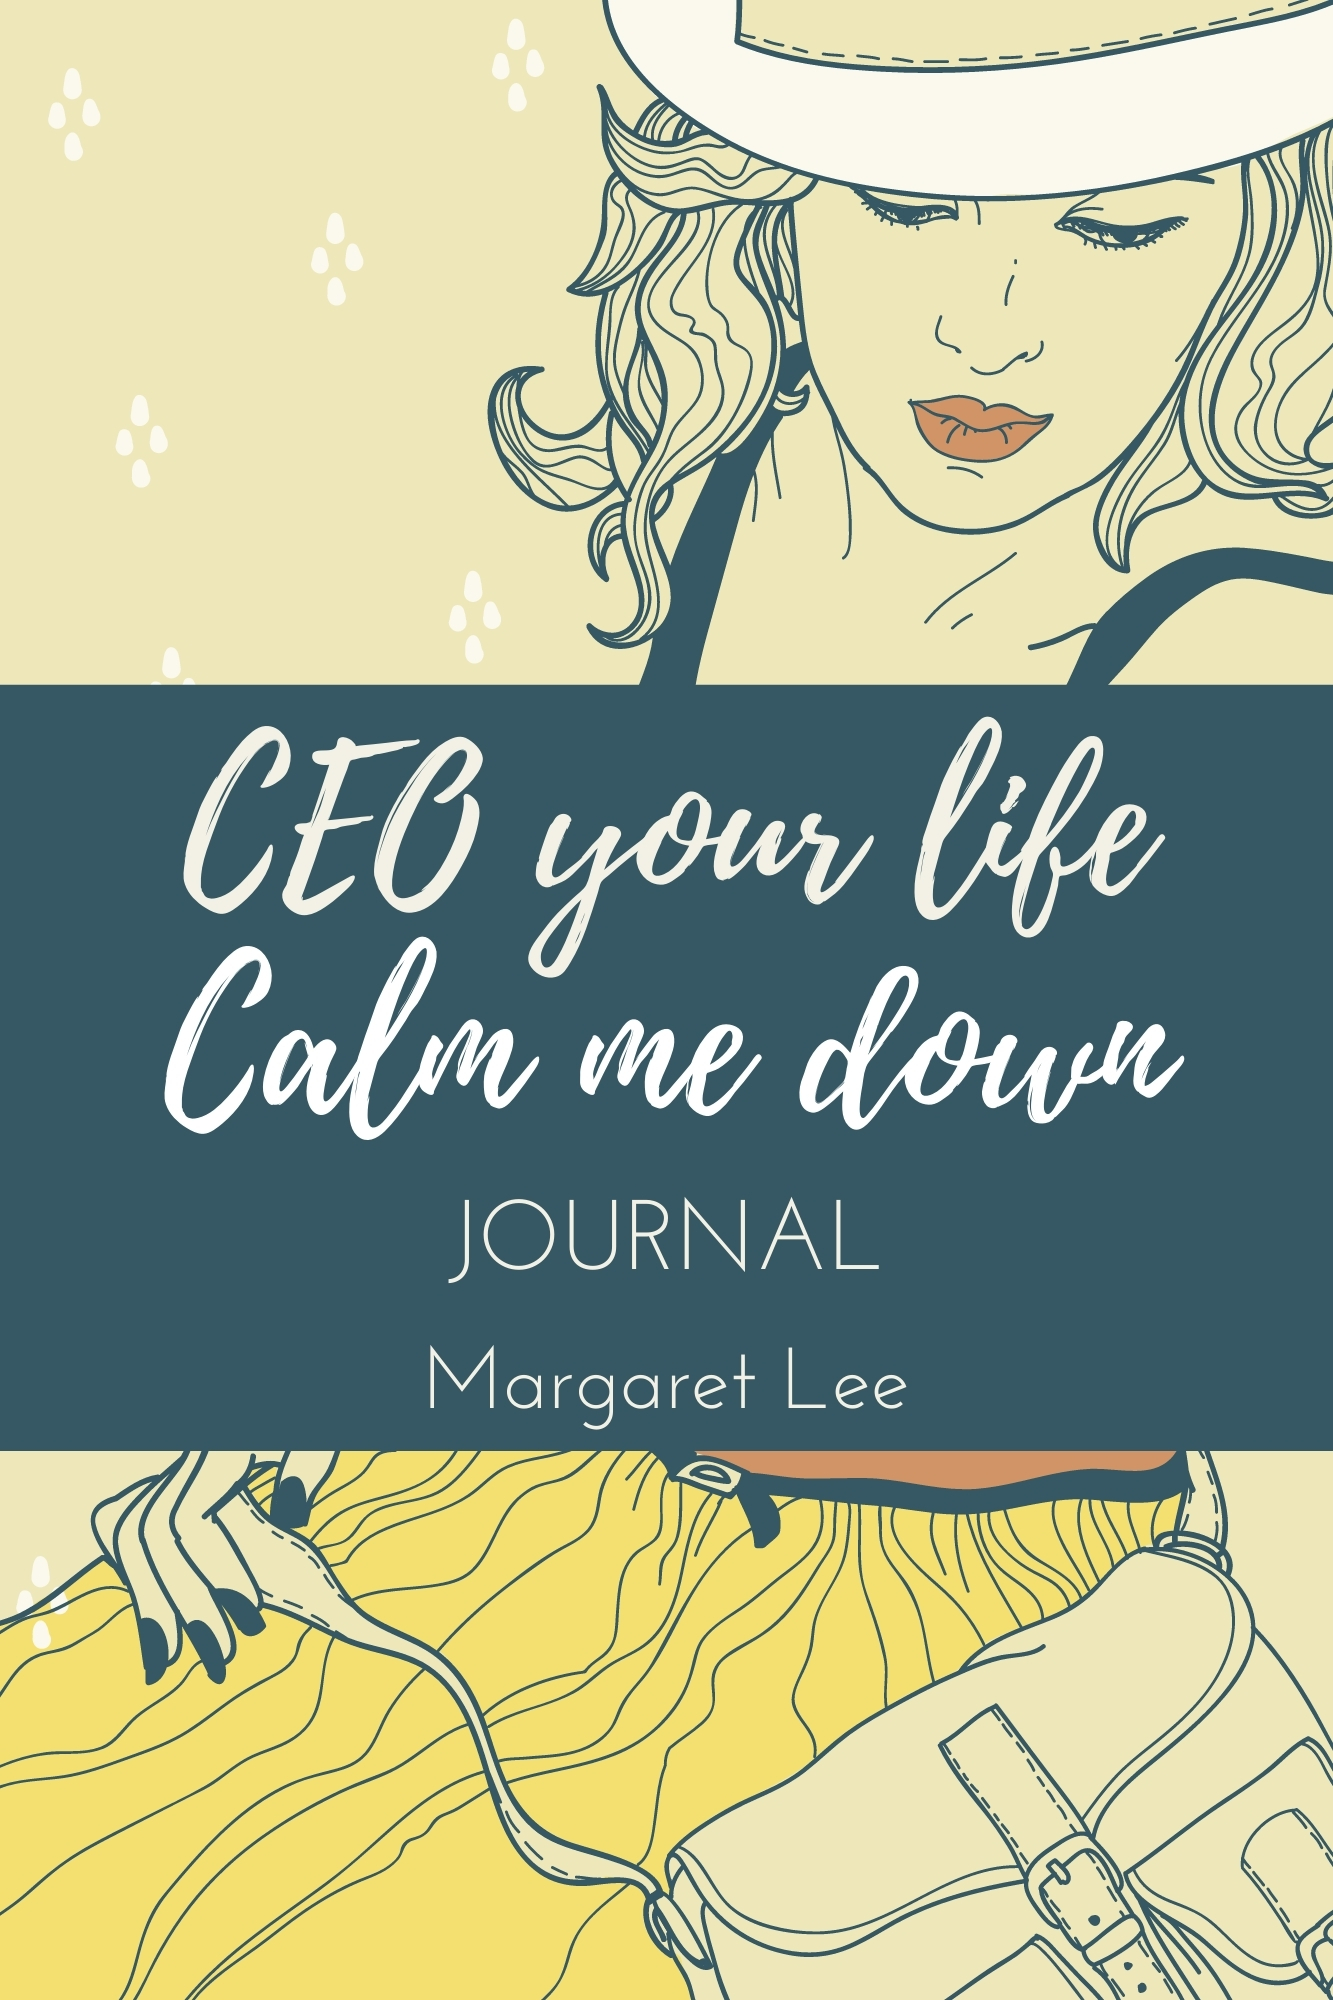 FREE: CEO your life – Calm me down journal by Margaret Lee